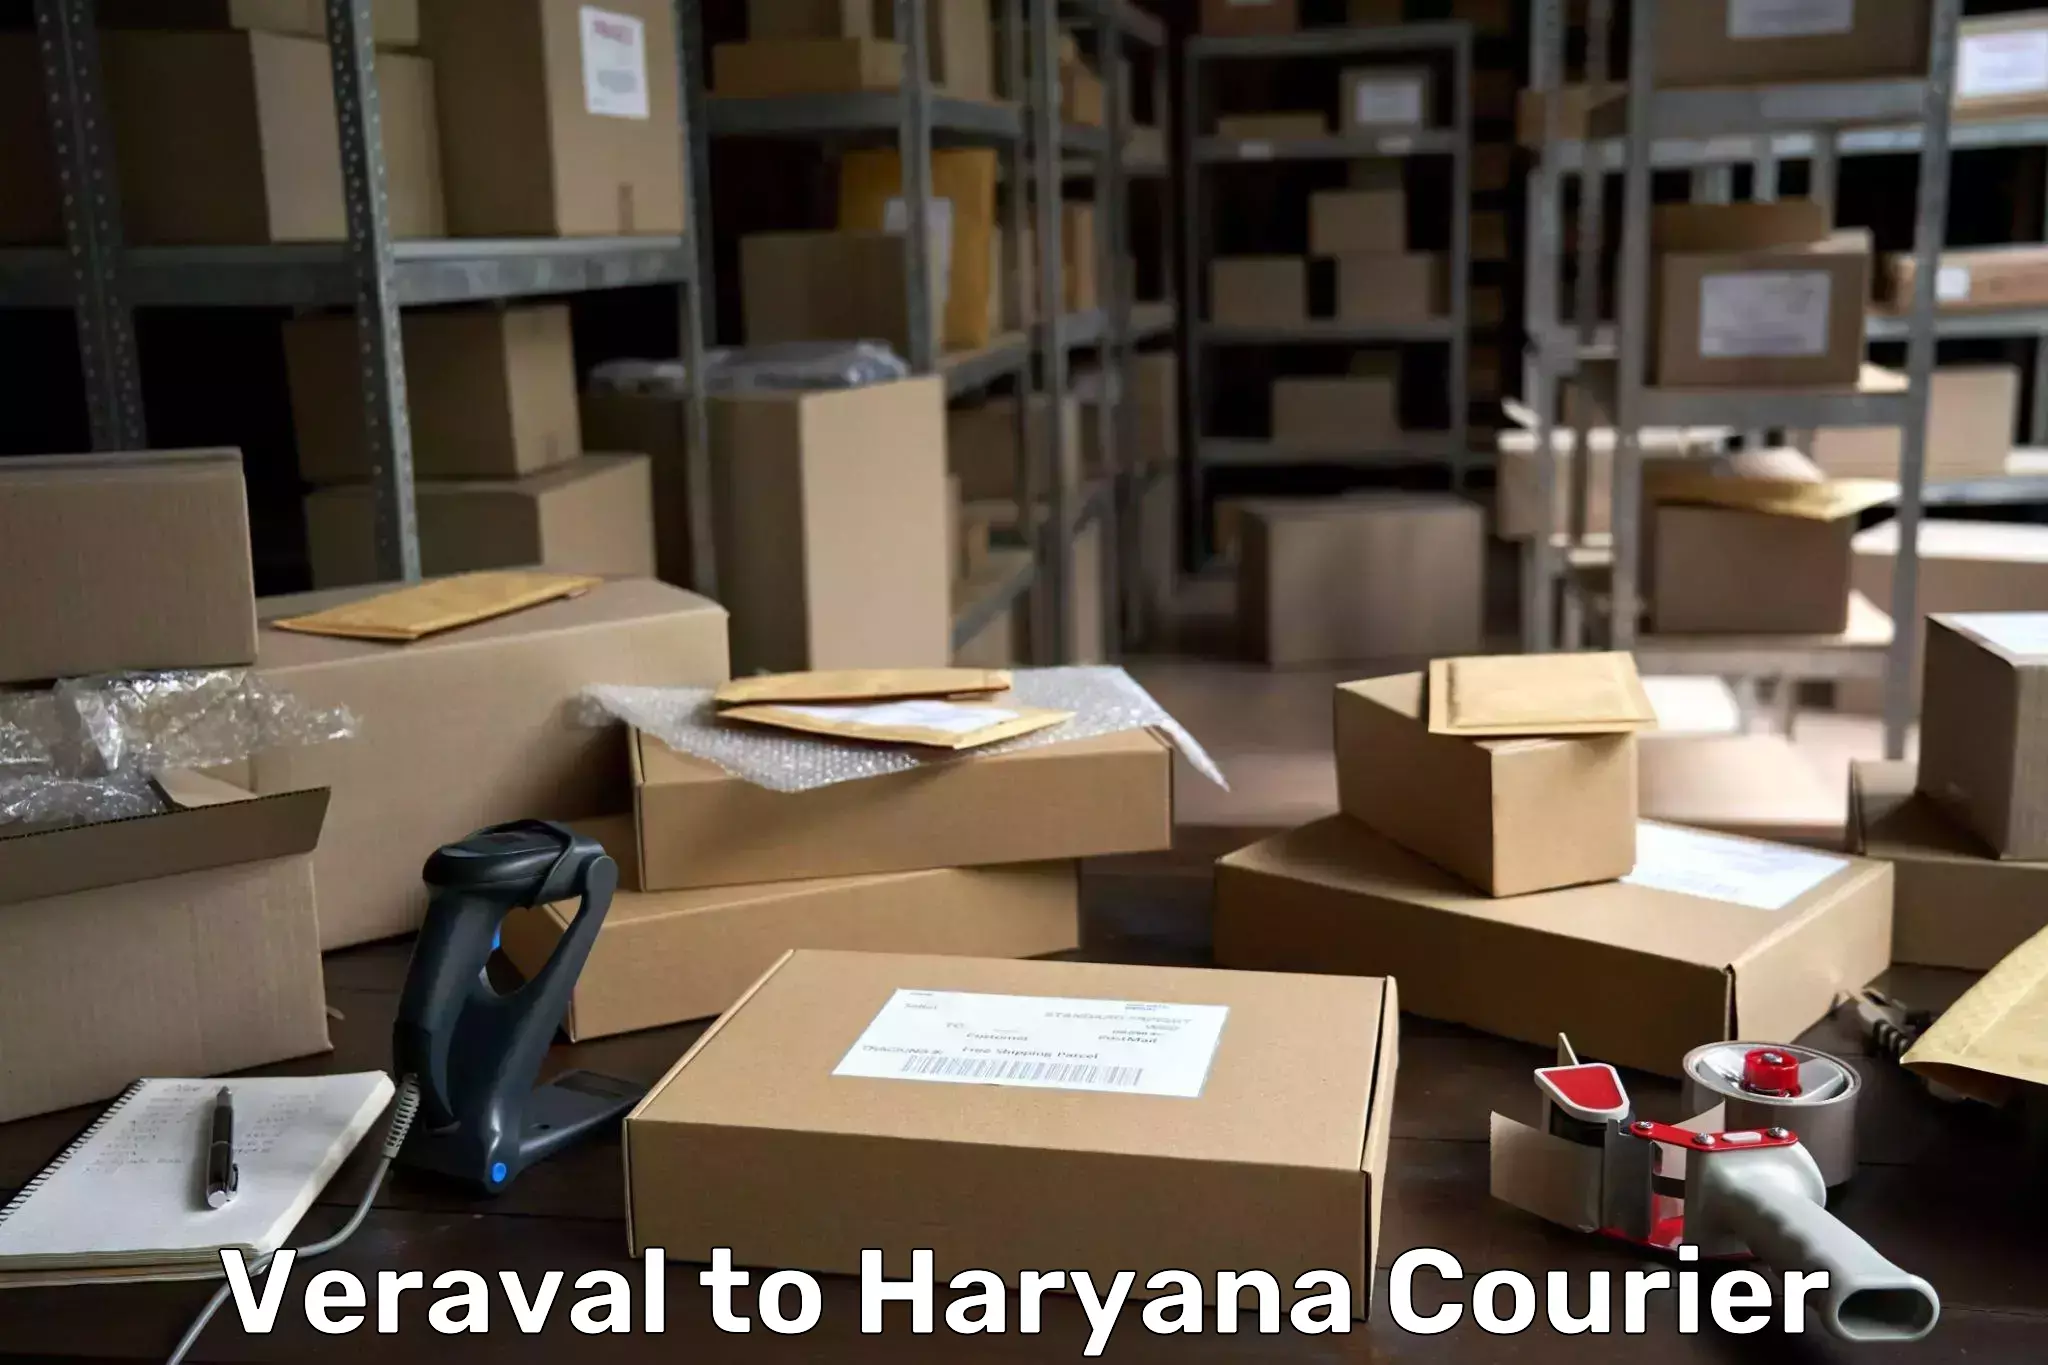 Custom courier packaging Veraval to Chaudhary Charan Singh Haryana Agricultural University Hisar